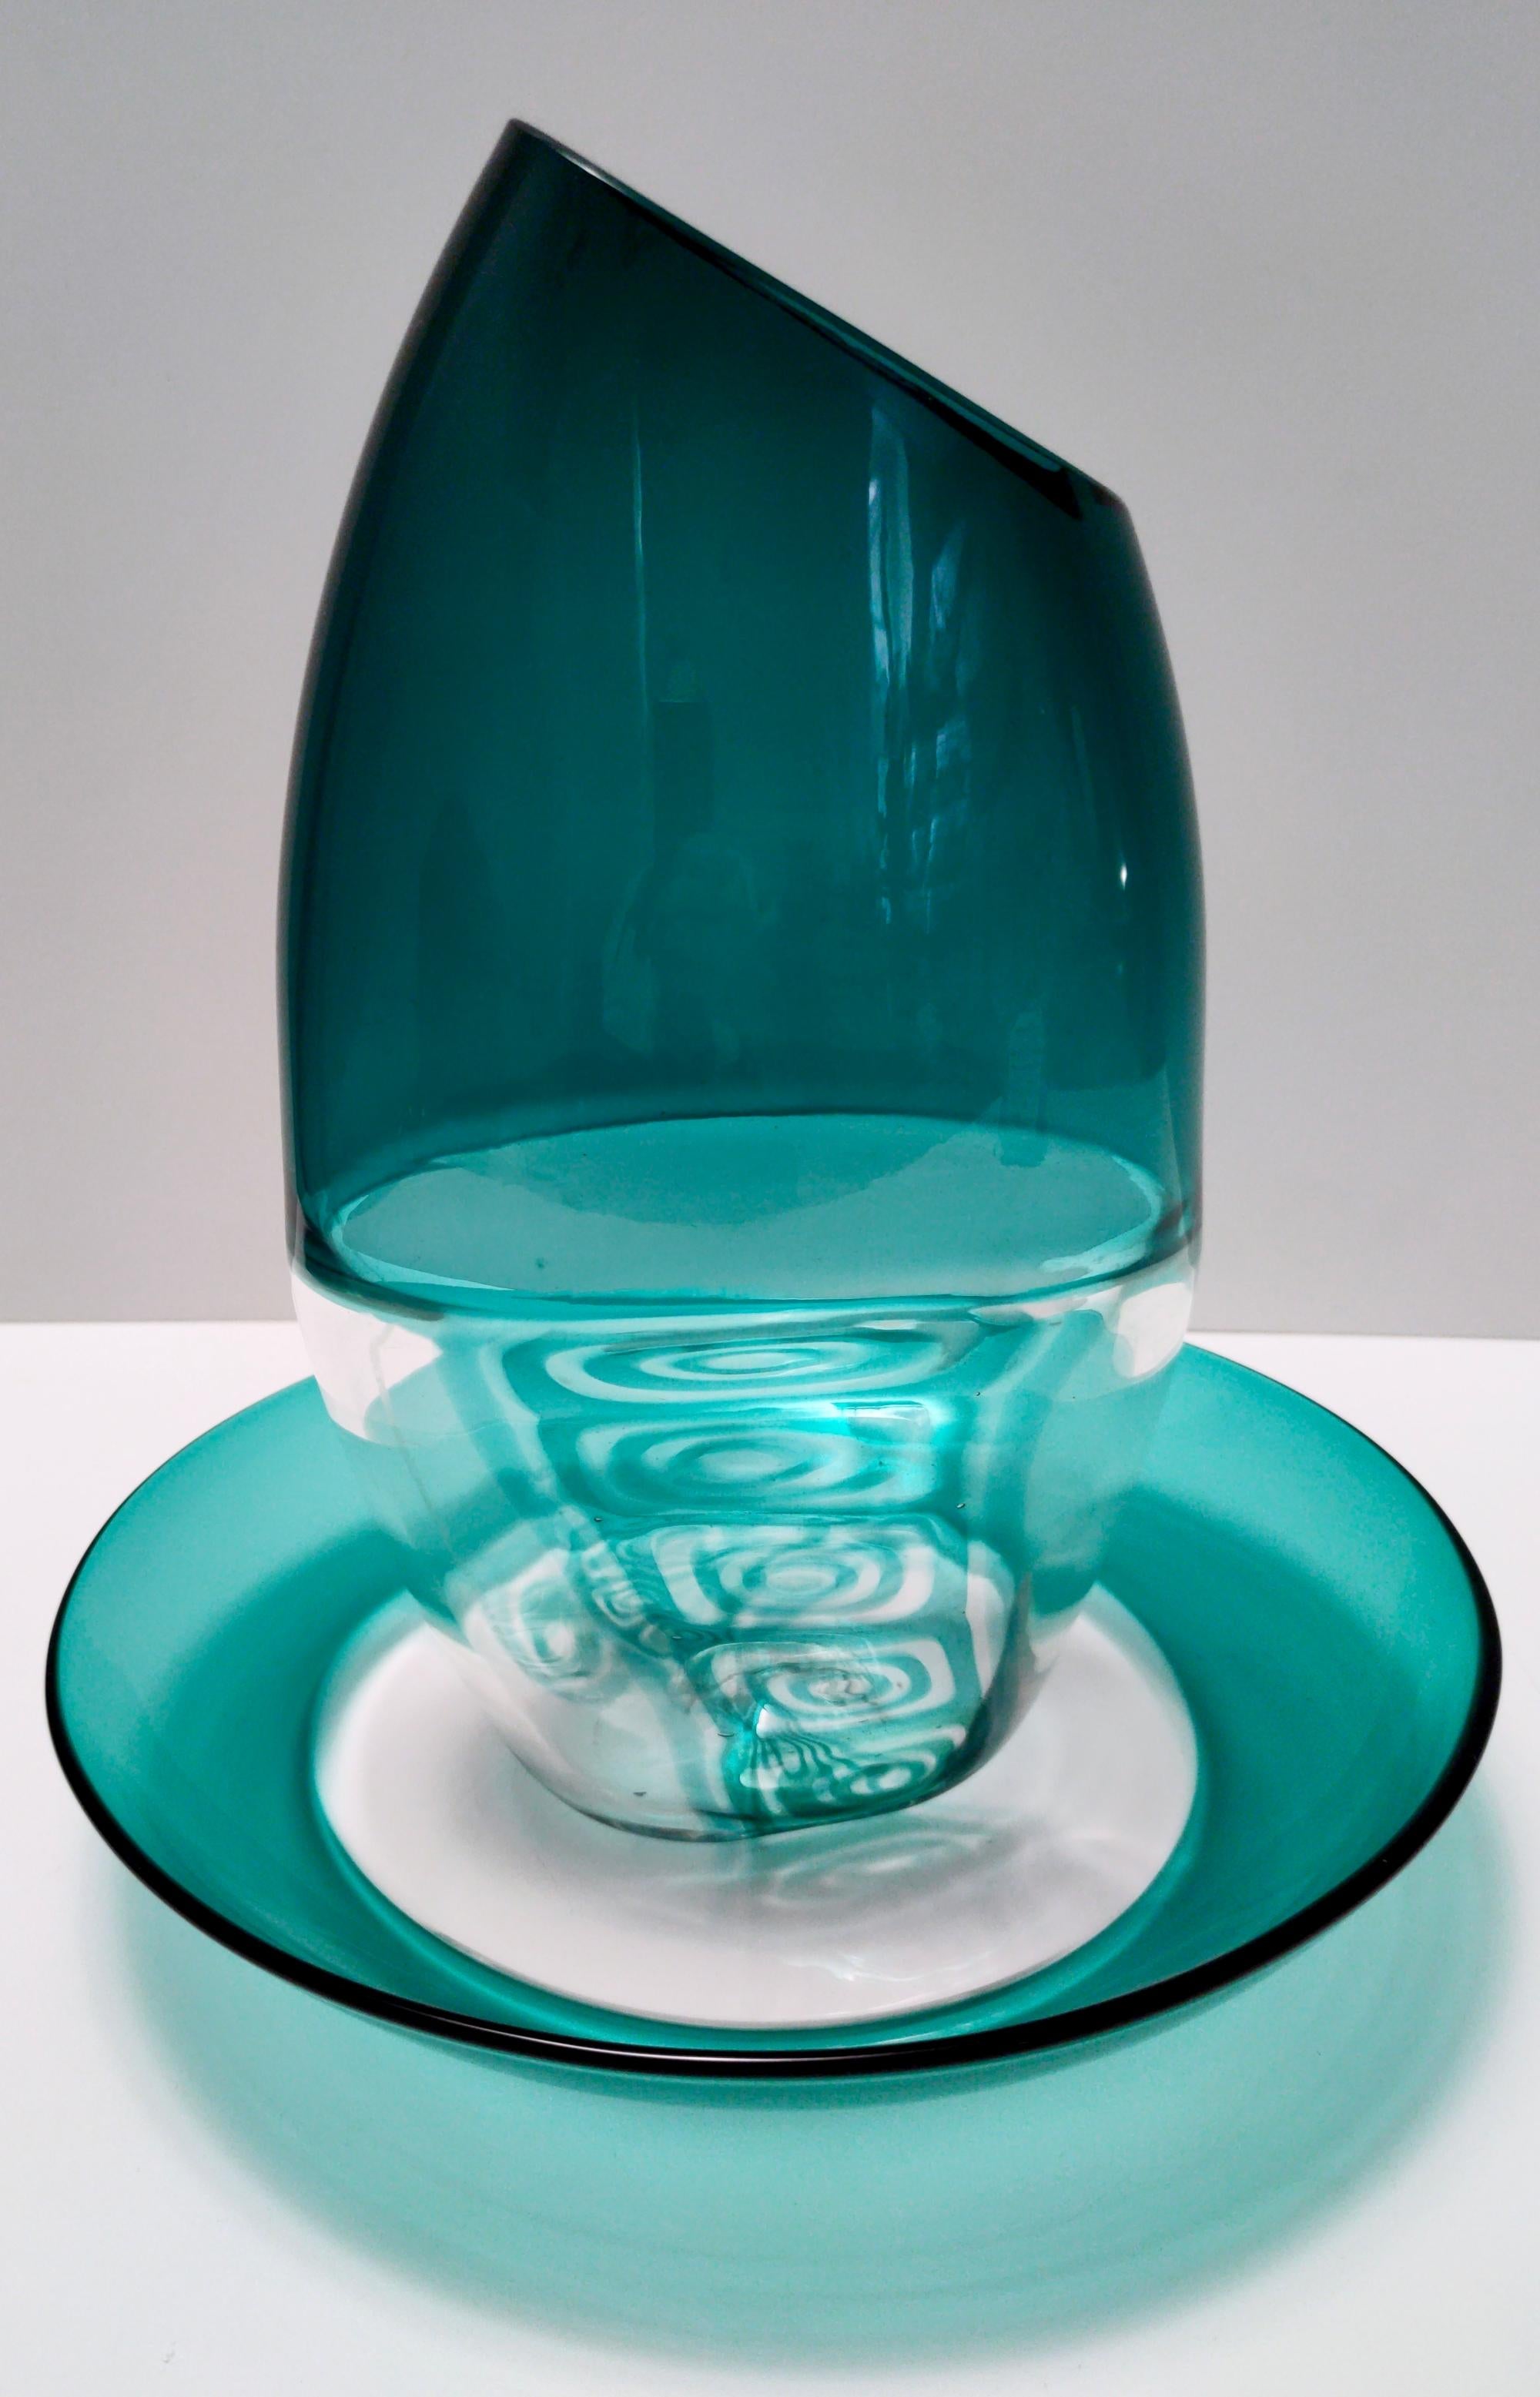 Post-Modern Postmodern Teal Murano Glass Plate and Vase by La Murrina, Italy For Sale